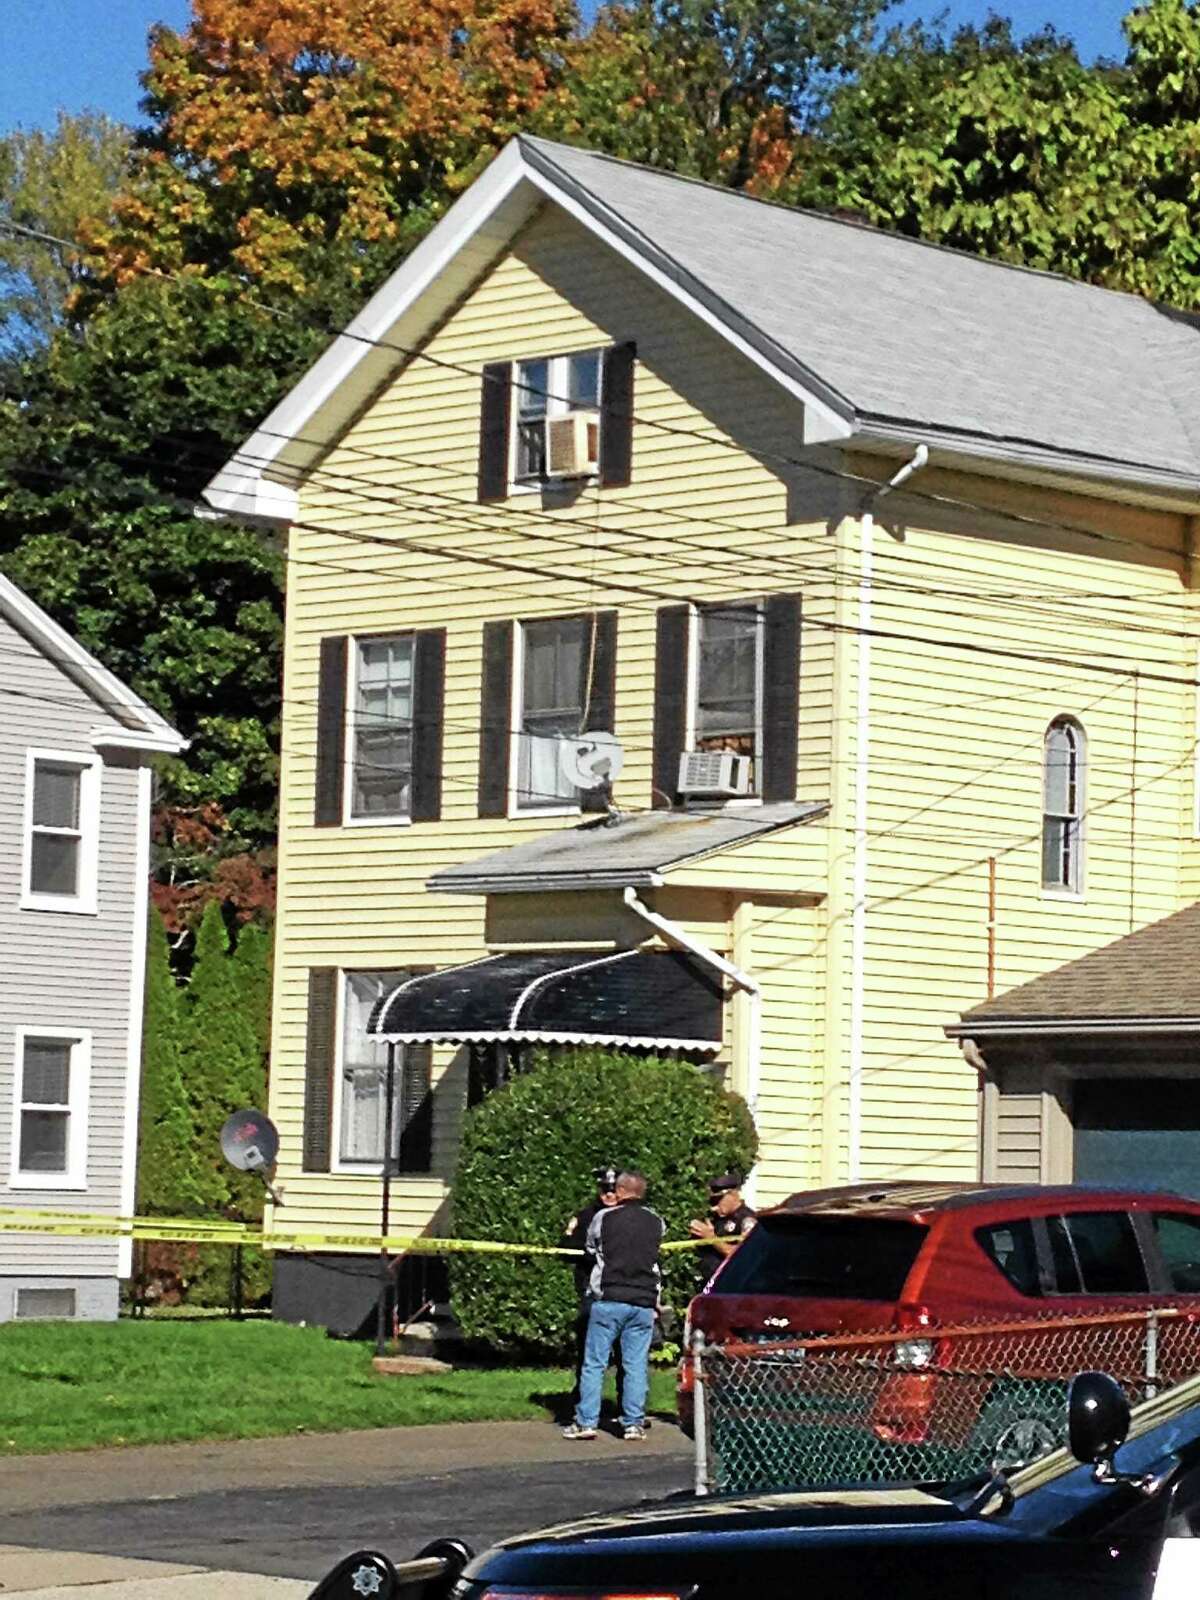 Police investigate a shooting at a home on Circular Avenue in Hamden Sunday.